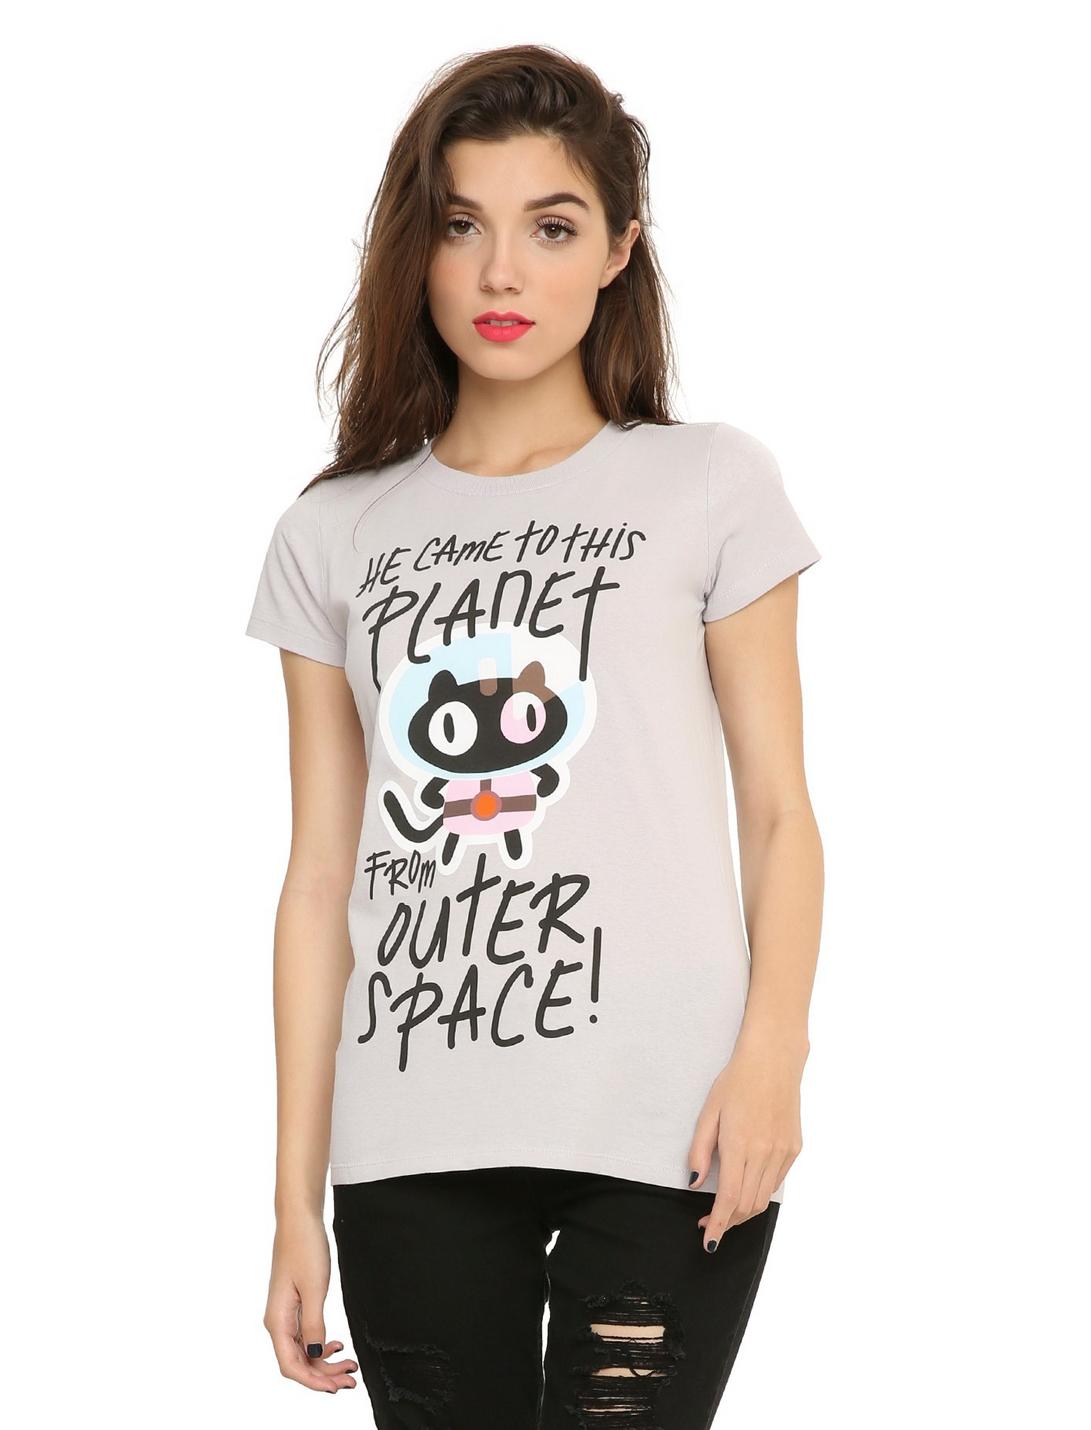 Steven Universe Cookie Cat From Outer Space Girls T-Shirt, WHITE, hi-res